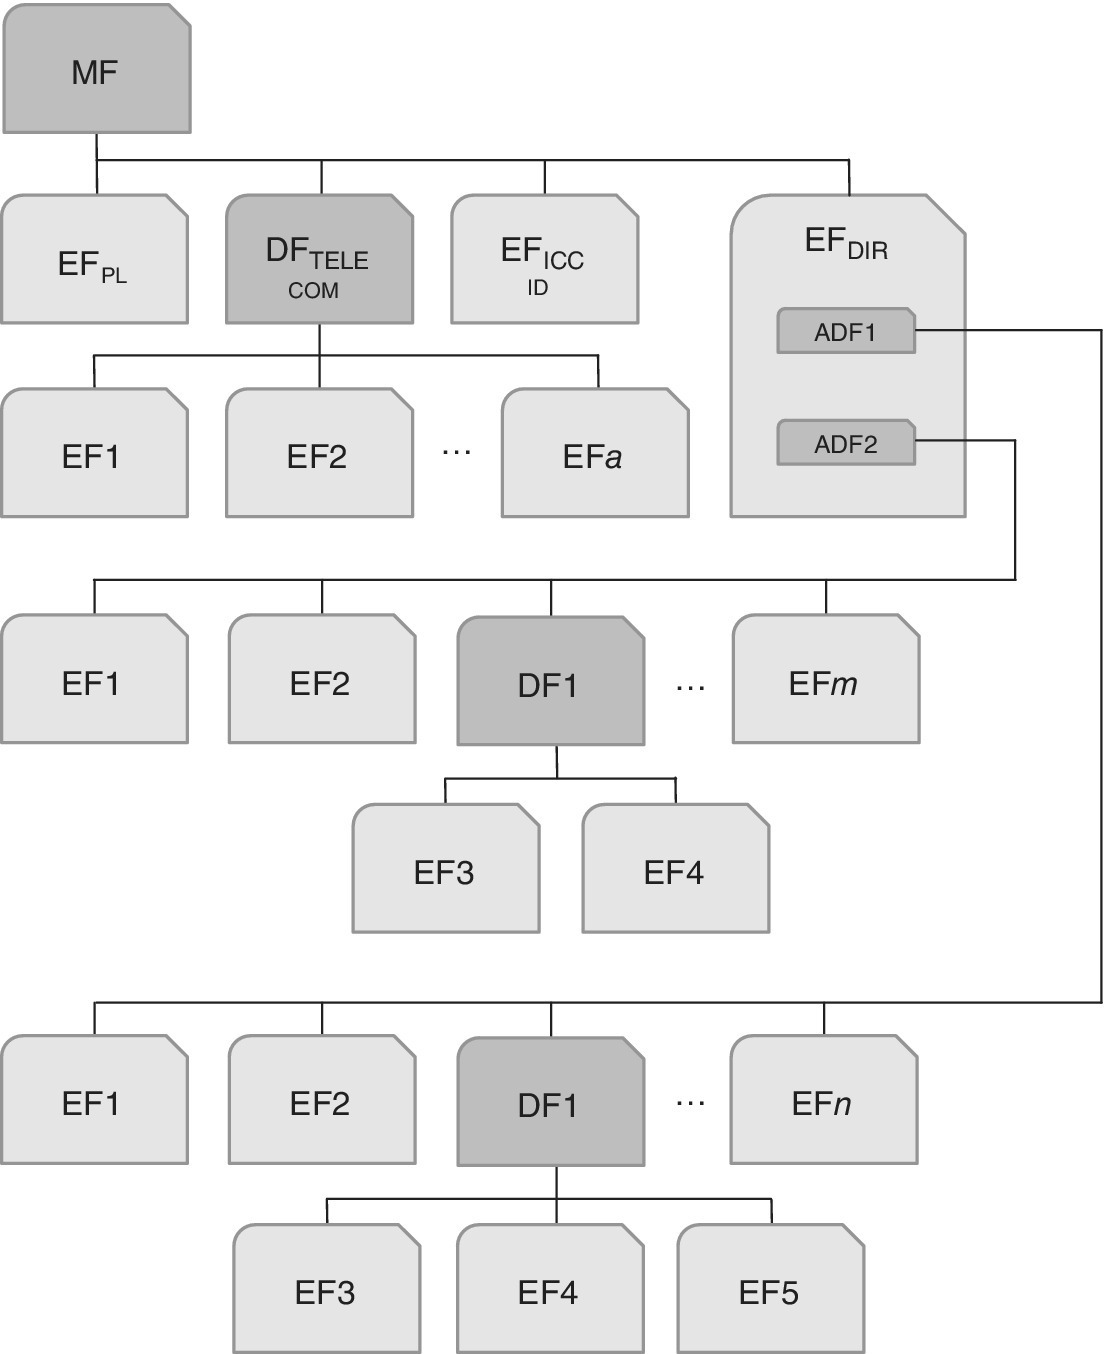 Schematic diagram illustrating the principle of ADFs from MF to EF3, EF4, and EF5.